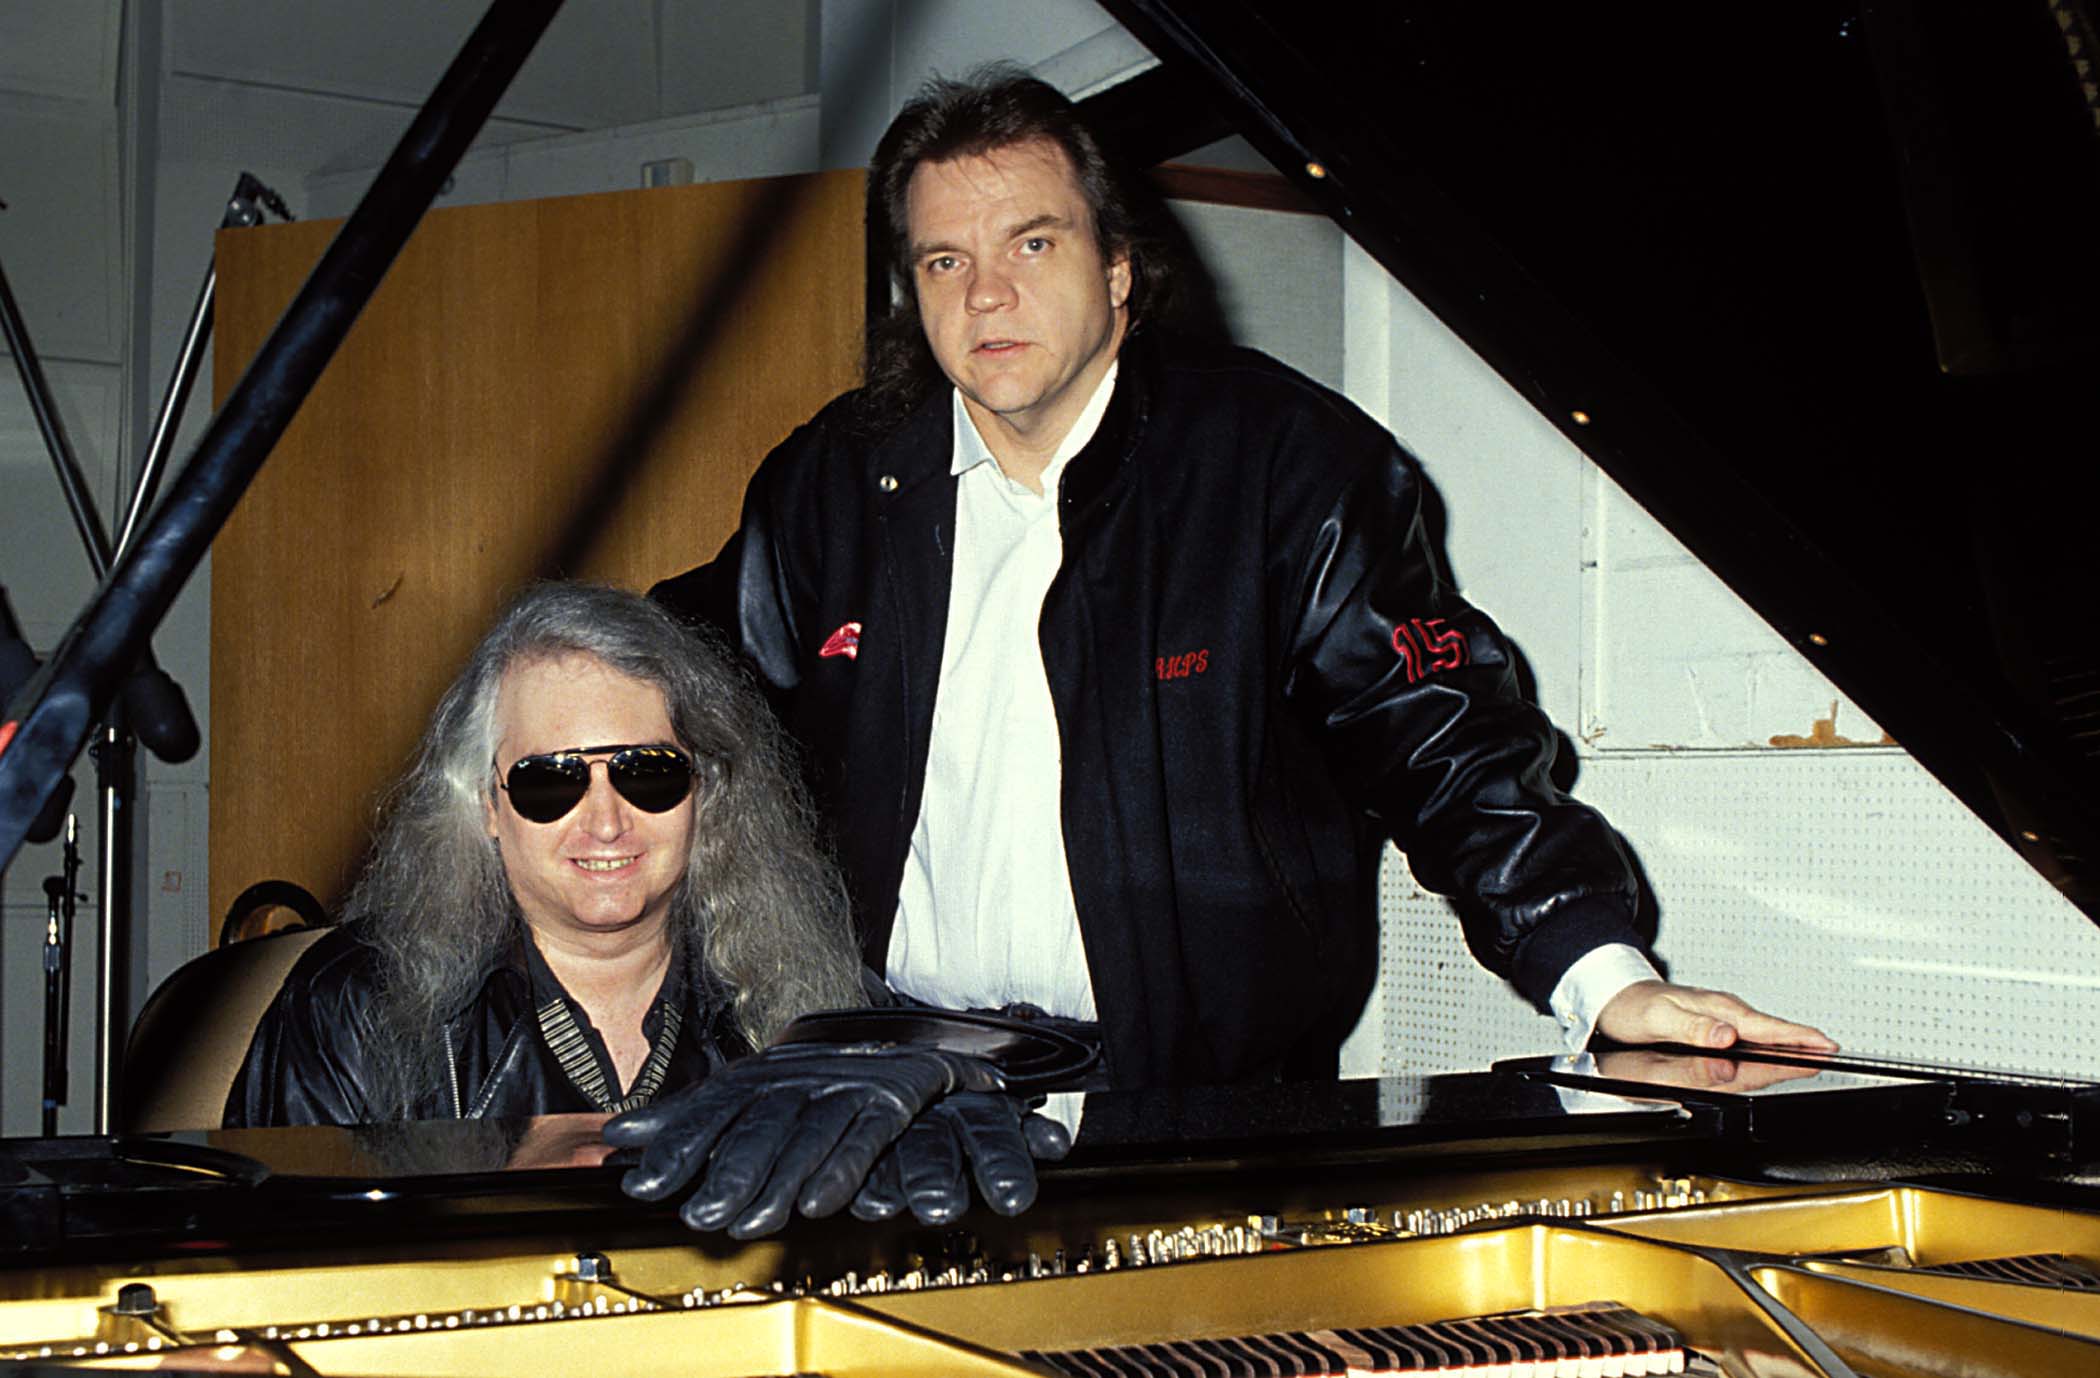 Jim Steinman sits at a piano while Meat Loaf stands